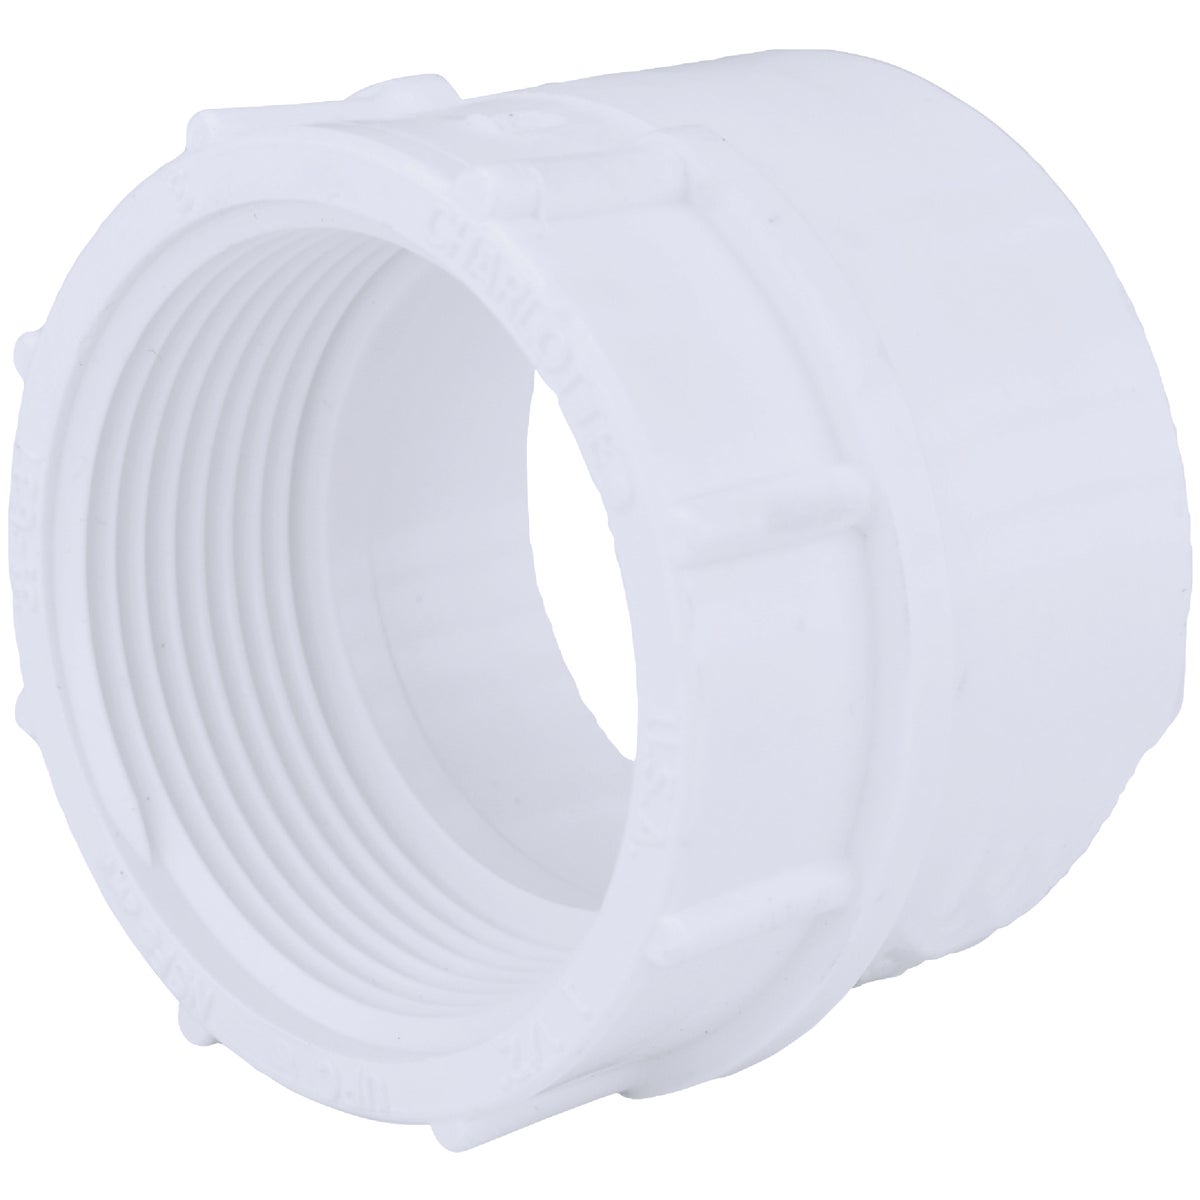 Charlotte Pipe 1-1/2 In. Hub x 1-1/2 In. FPT Schedule 40 DWV PVC Adapter